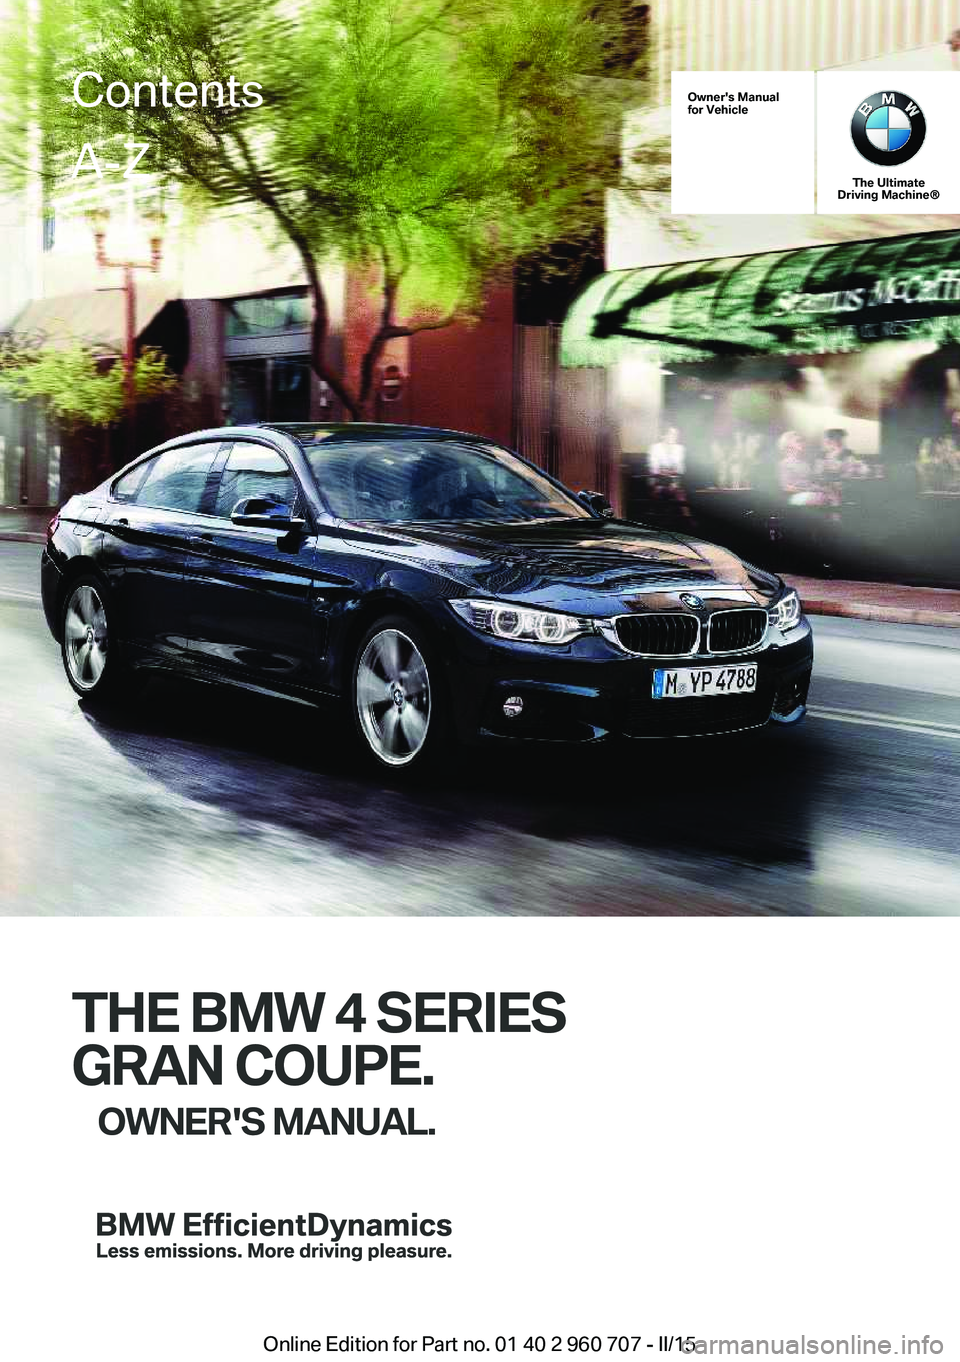 BMW 428I GRAN COUPE 2016  Owners Manual Owner's Manual
for Vehicle
The Ultimate
Driving Machine®
THE BMW 4 SERIES
GRAN COUPE. OWNER'S MANUAL.
ContentsA-Z
Online Edition for Part no. 01 40 2 960 707 - II/15   